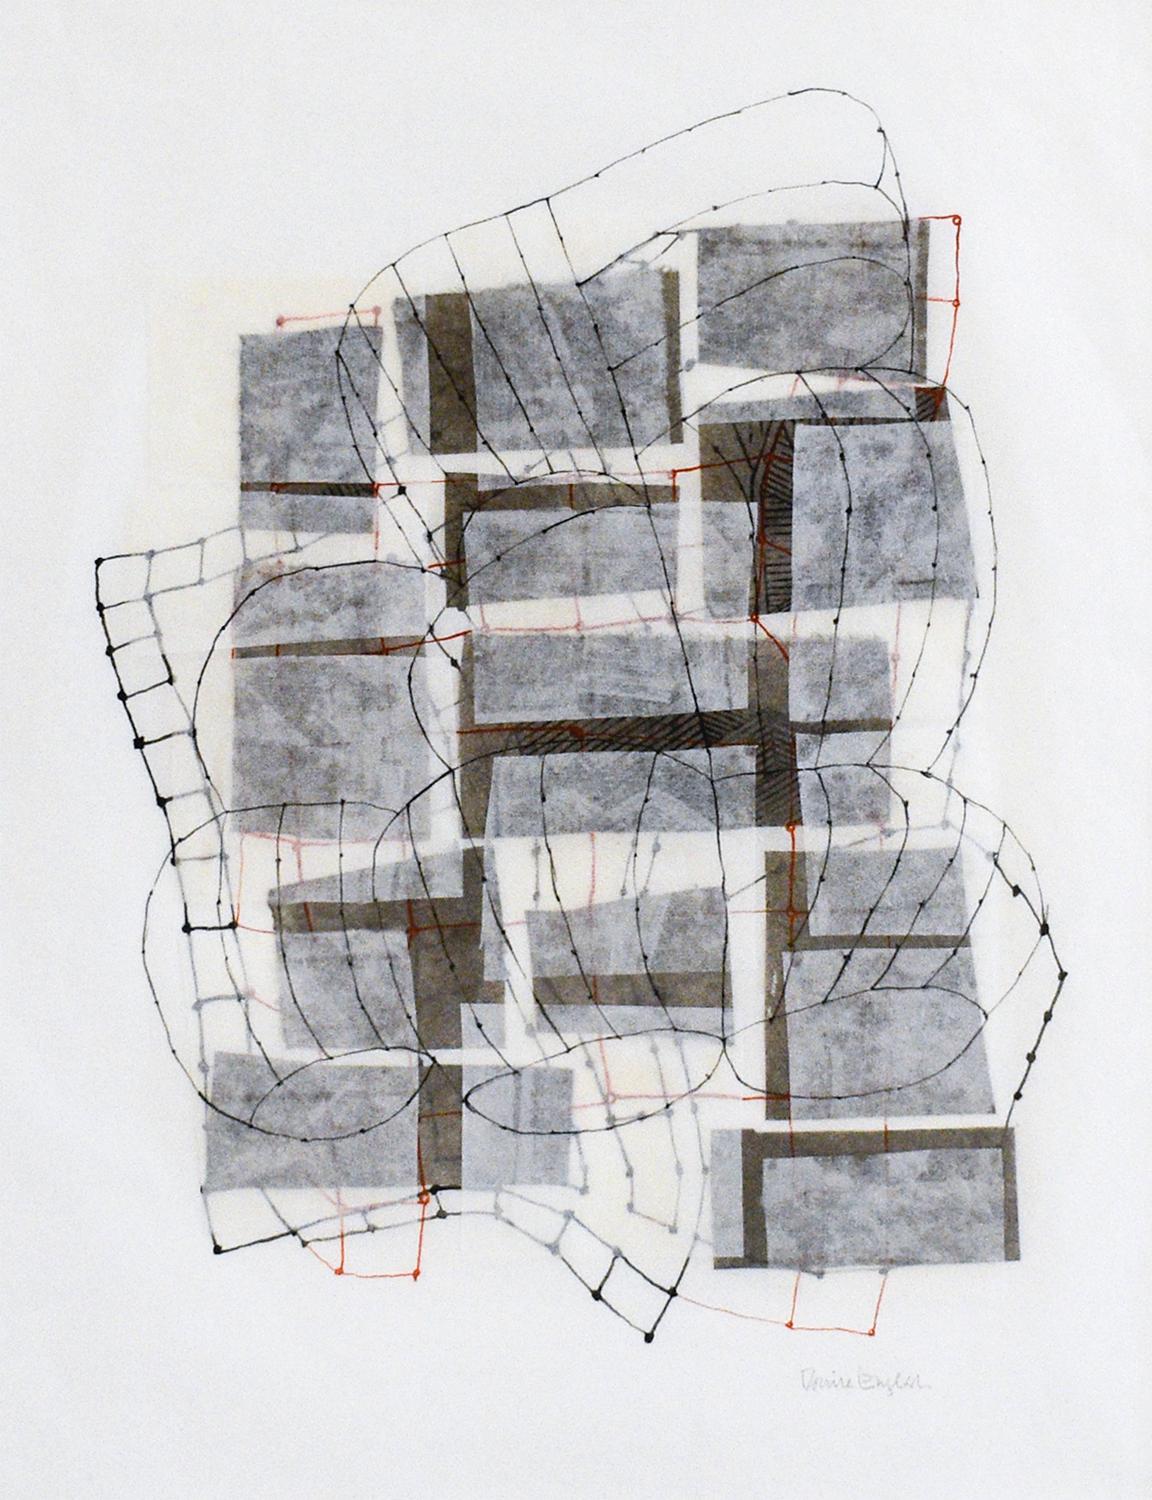 Layered Plan #6 (Abstract Geometric Black & White Mixed Media Collage on Paper) - Painting by Donise English